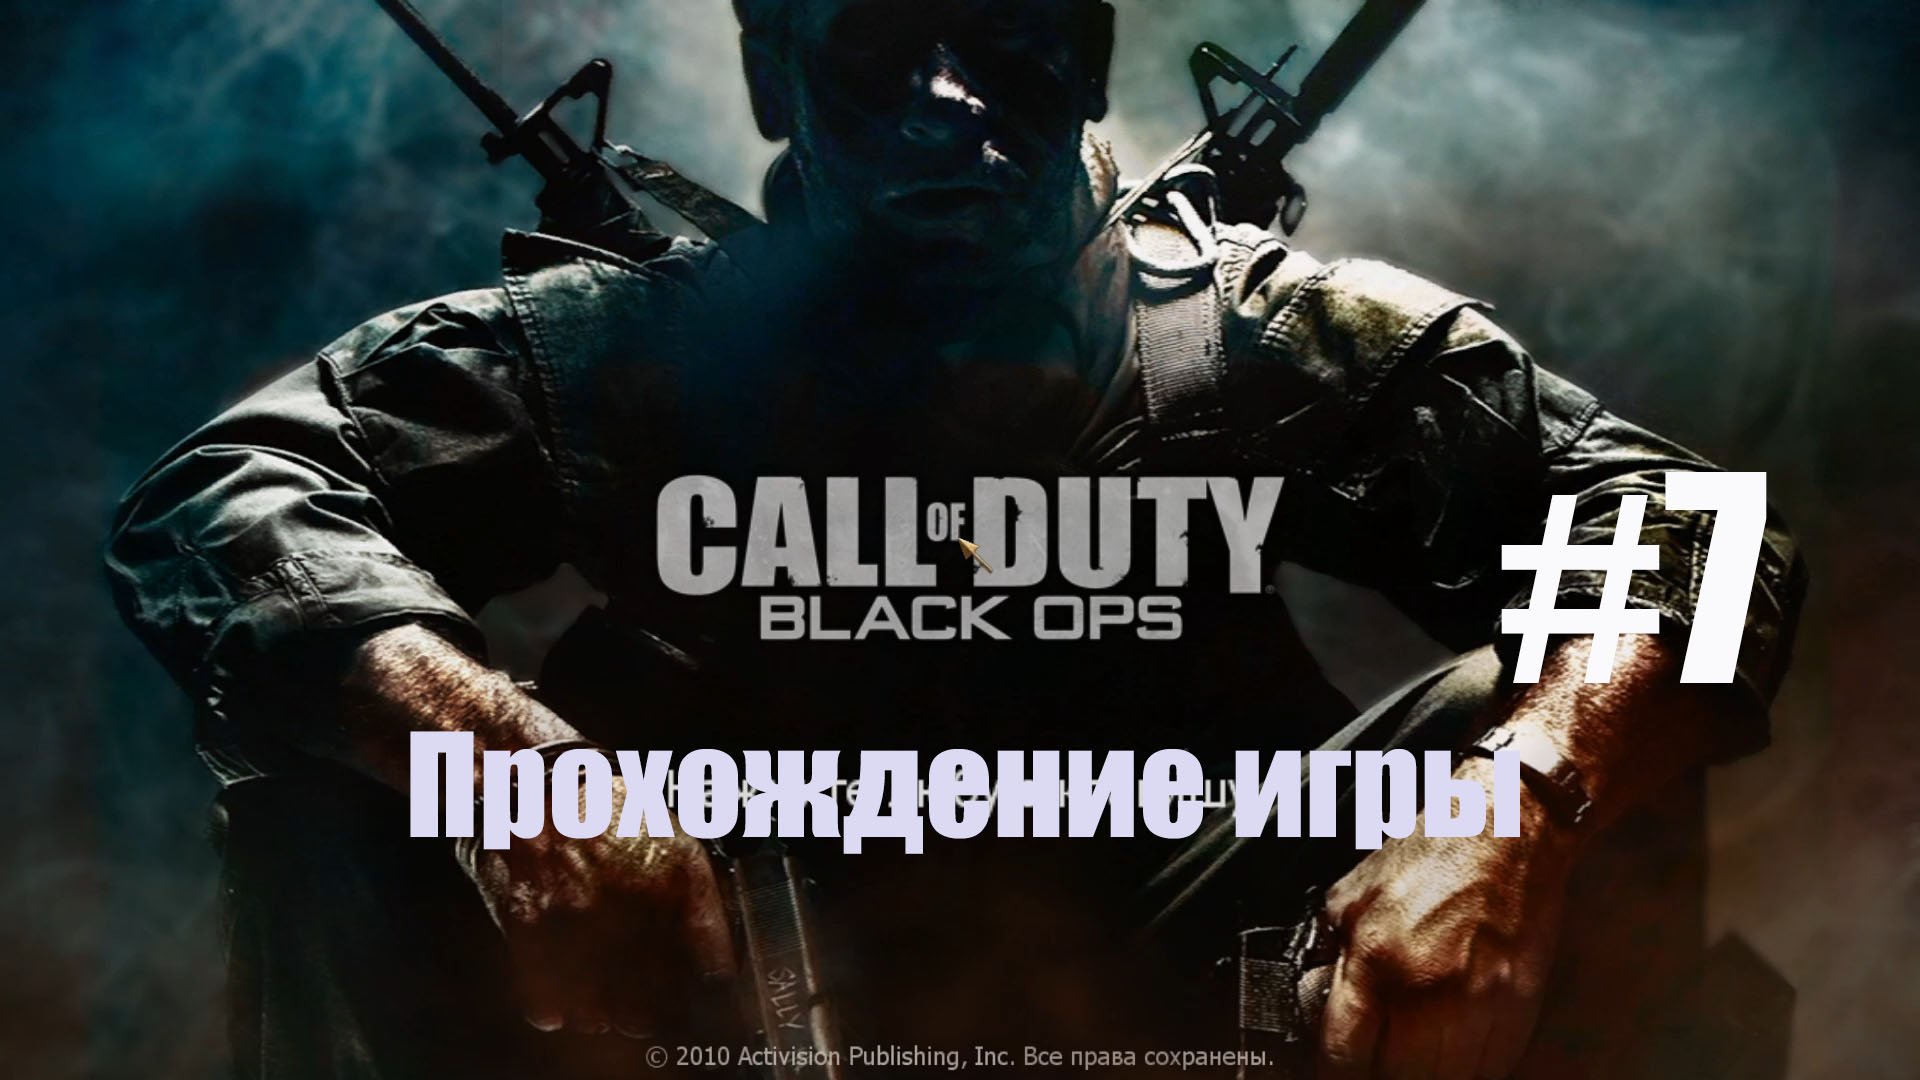 Call of Duty Black Ops #7